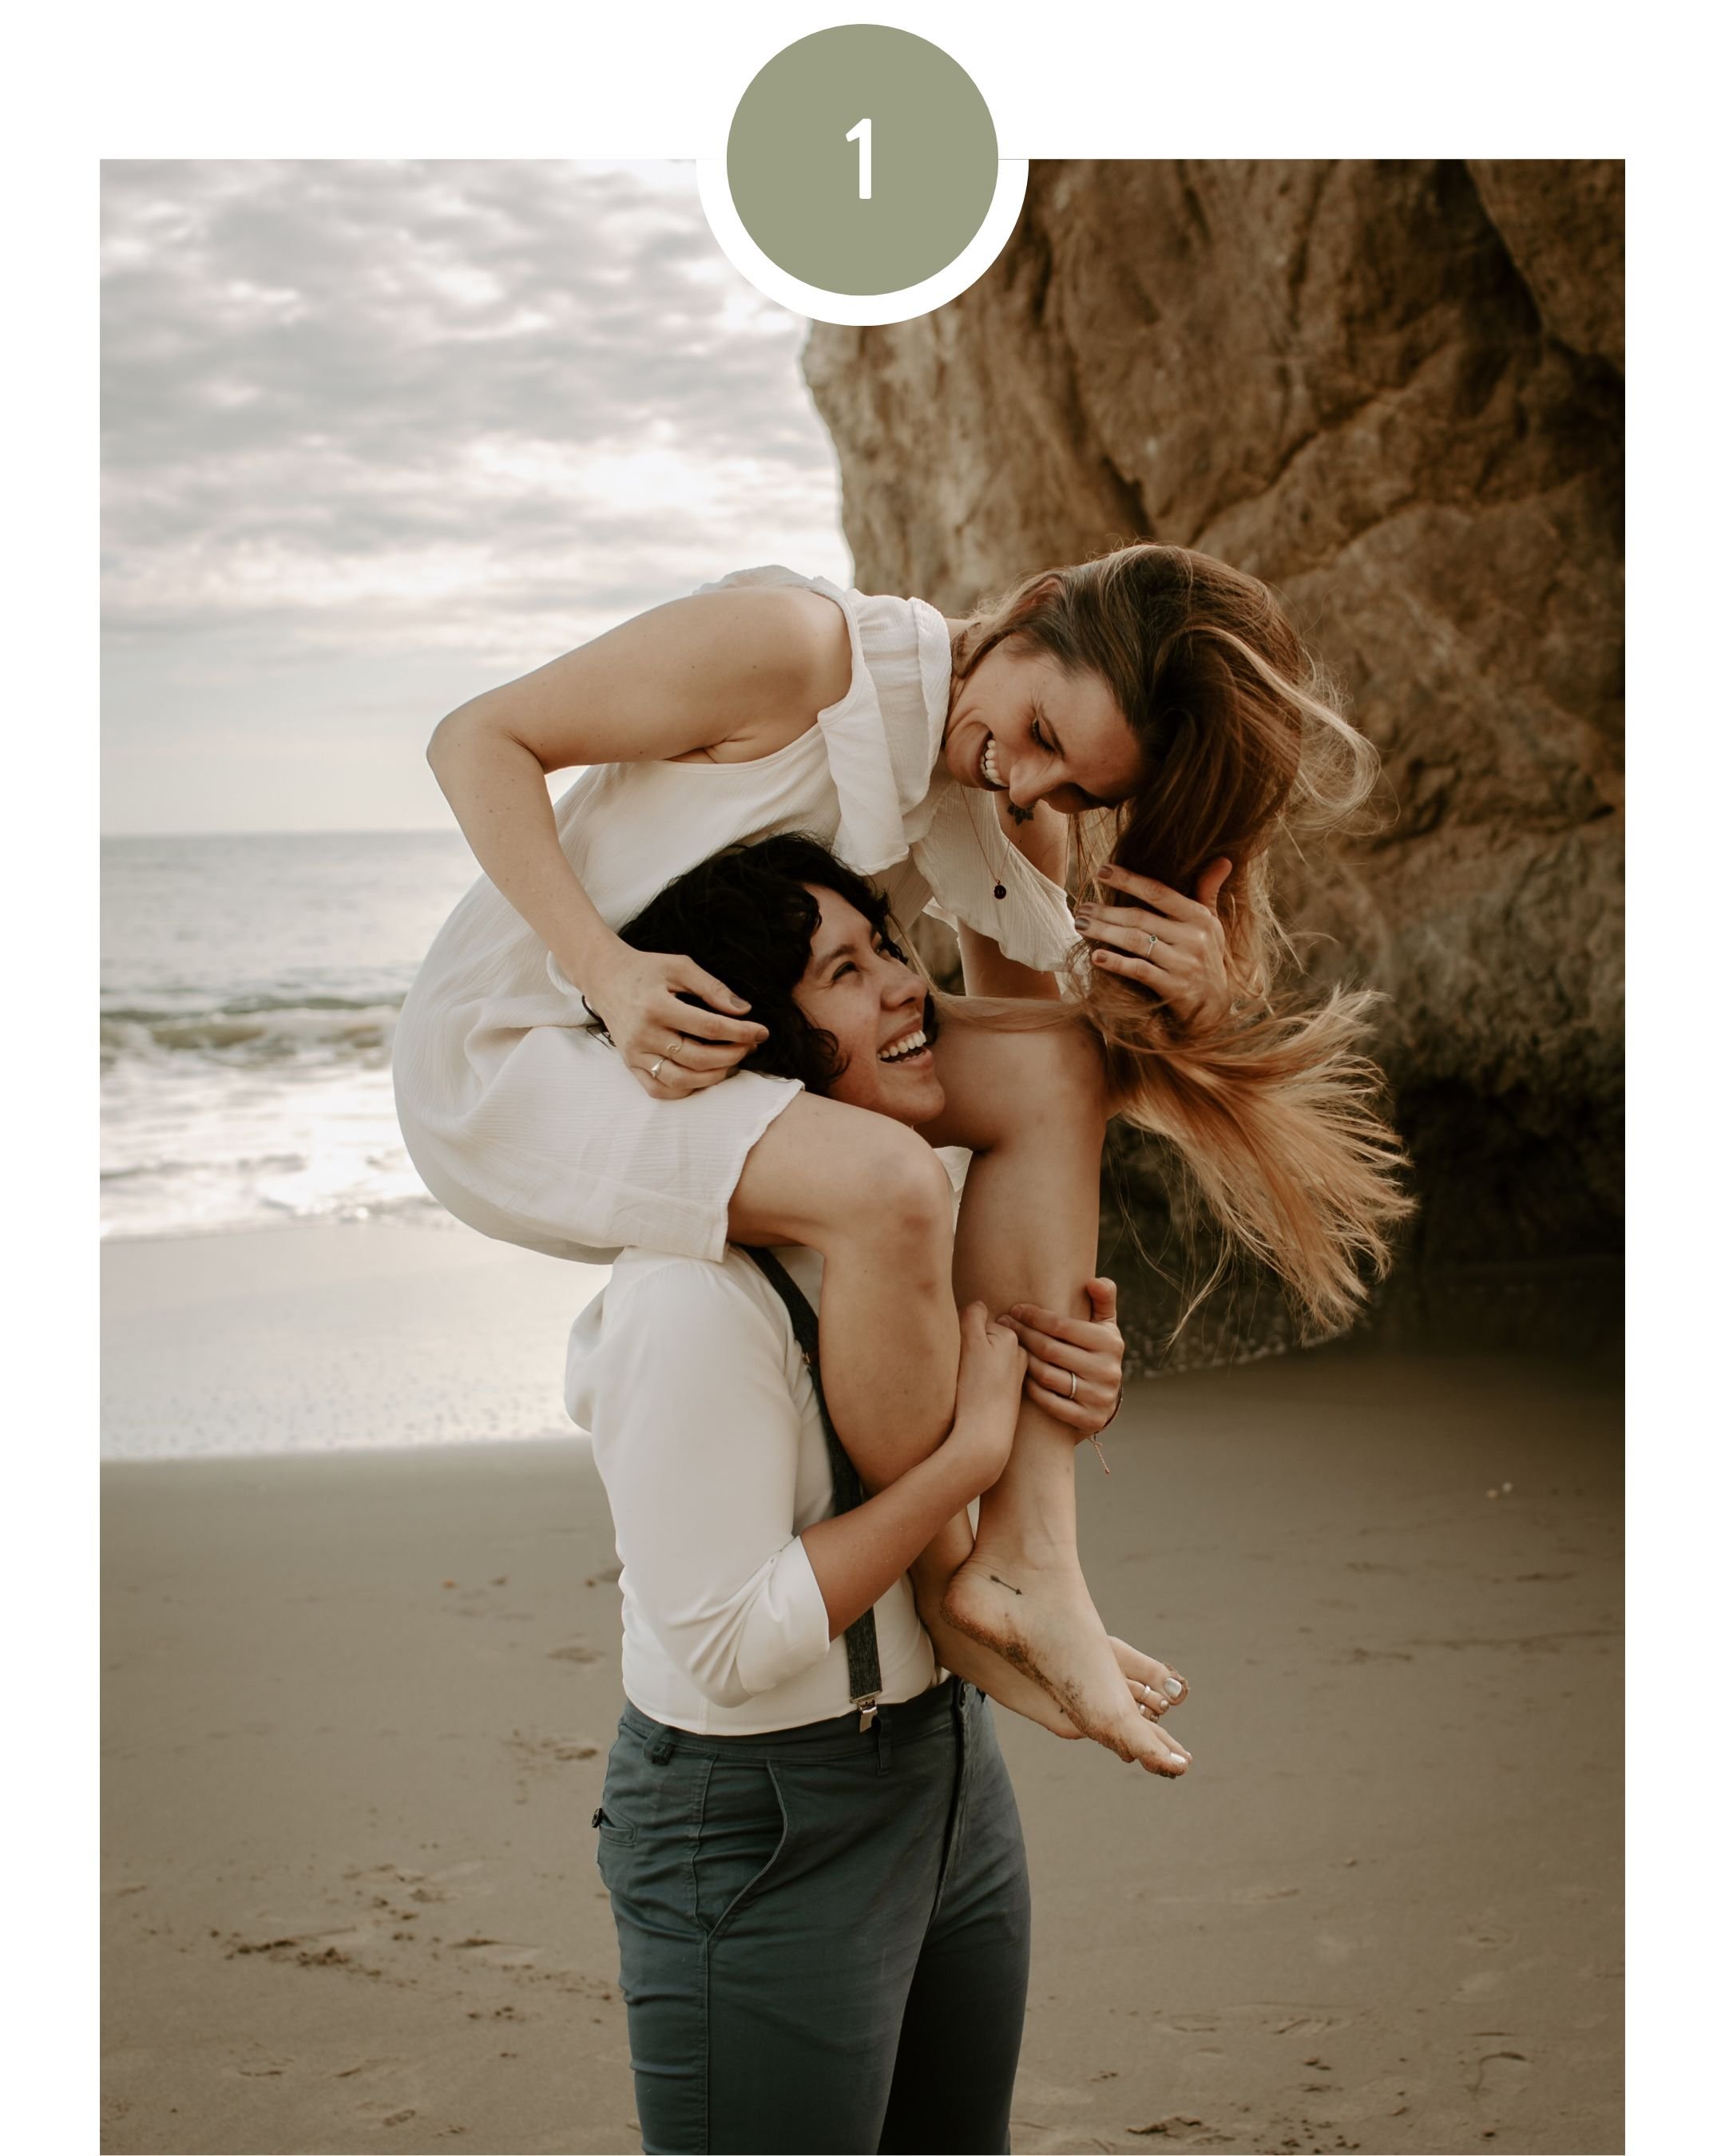 5 Lift Poses to Try at your Next Engagement Session | Brittany Navin